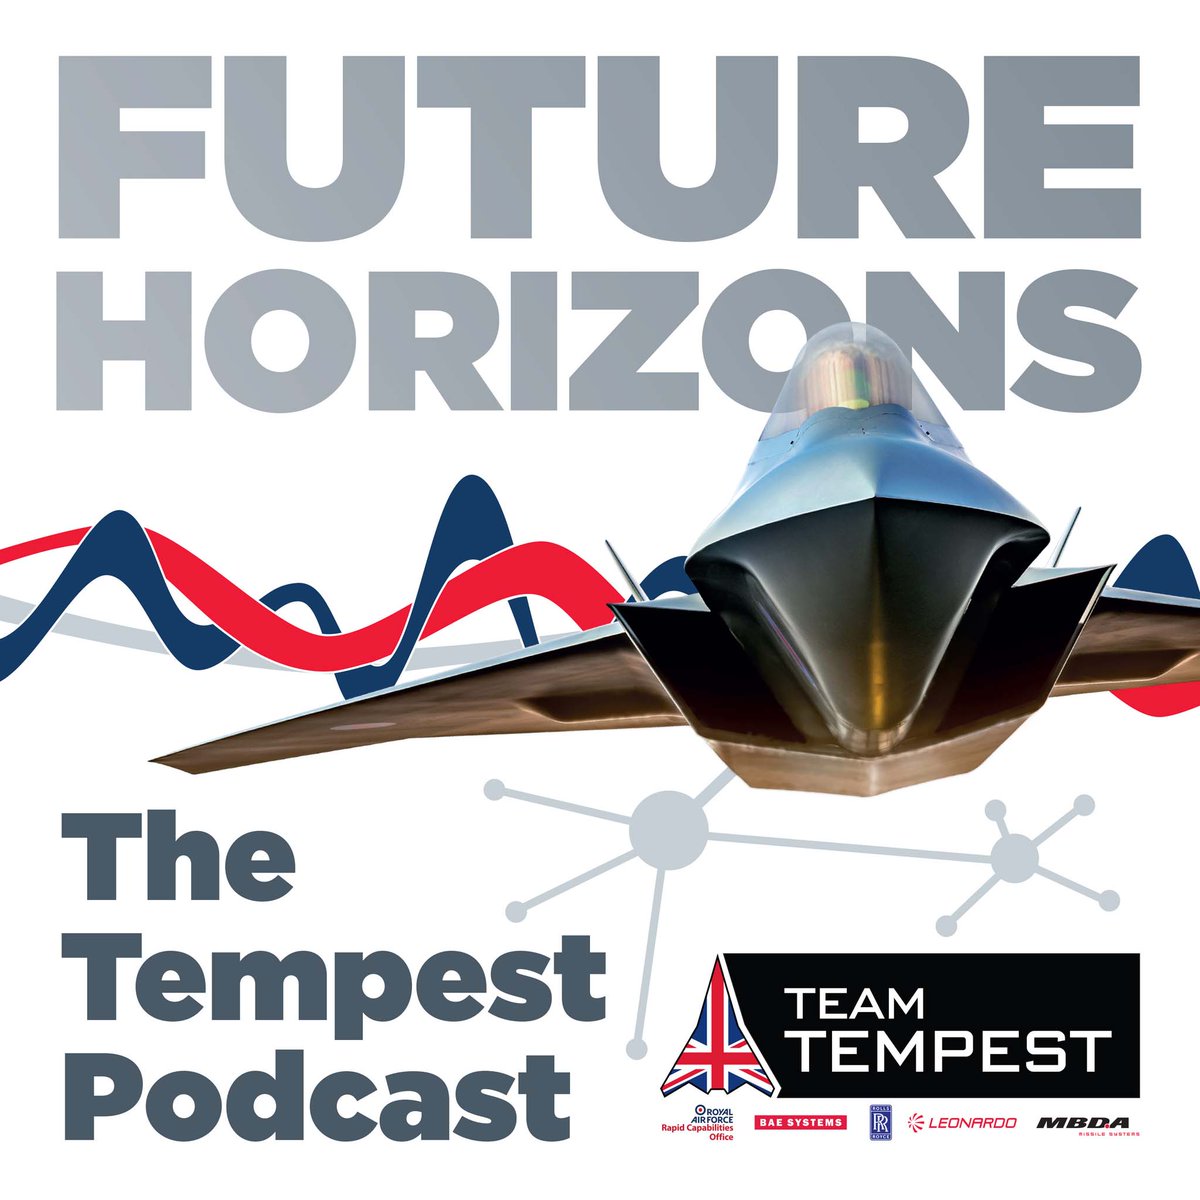 Listen to the latest @‌TeamTempest #FutureHorizon’s podcast and find out more about the UK’s first new flying demonstrator in 40 years: 
Future Horizons: The Tempest Podcast | Team Tempest (podbean.com)
#TeamTempestUK #RollsRoyce #podcast